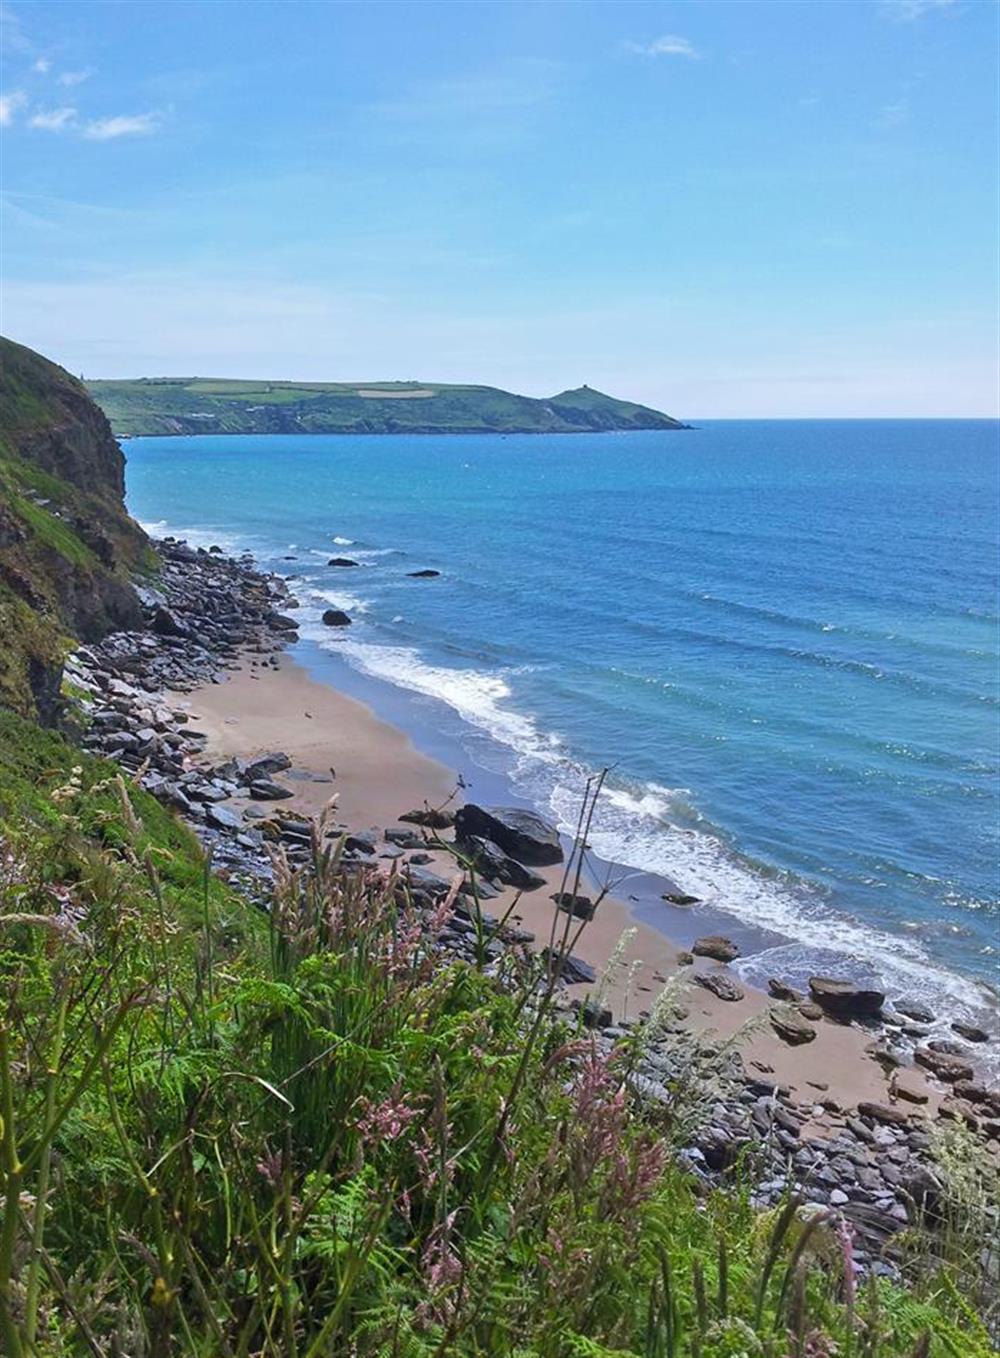 Whitsand Bay along the South East coast of Cornwall at Apartment 1, Buller House, Looe